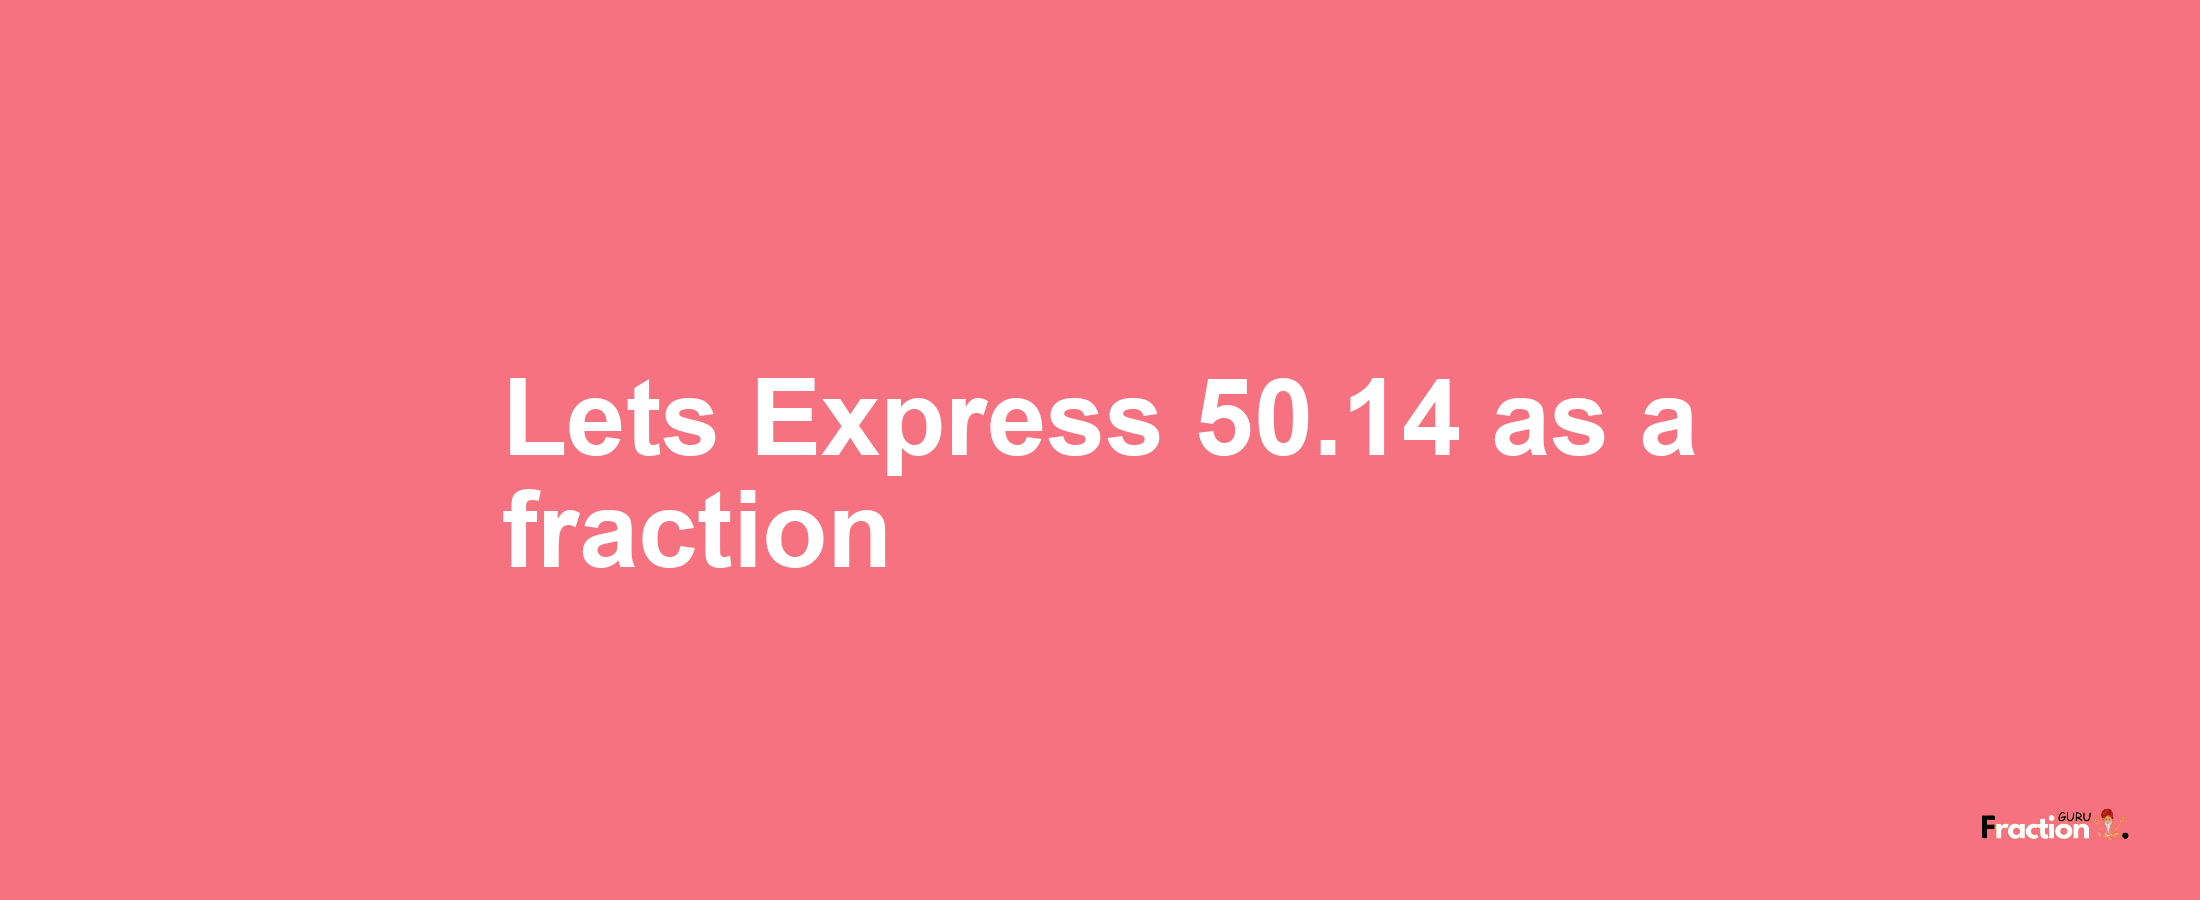 Lets Express 50.14 as afraction